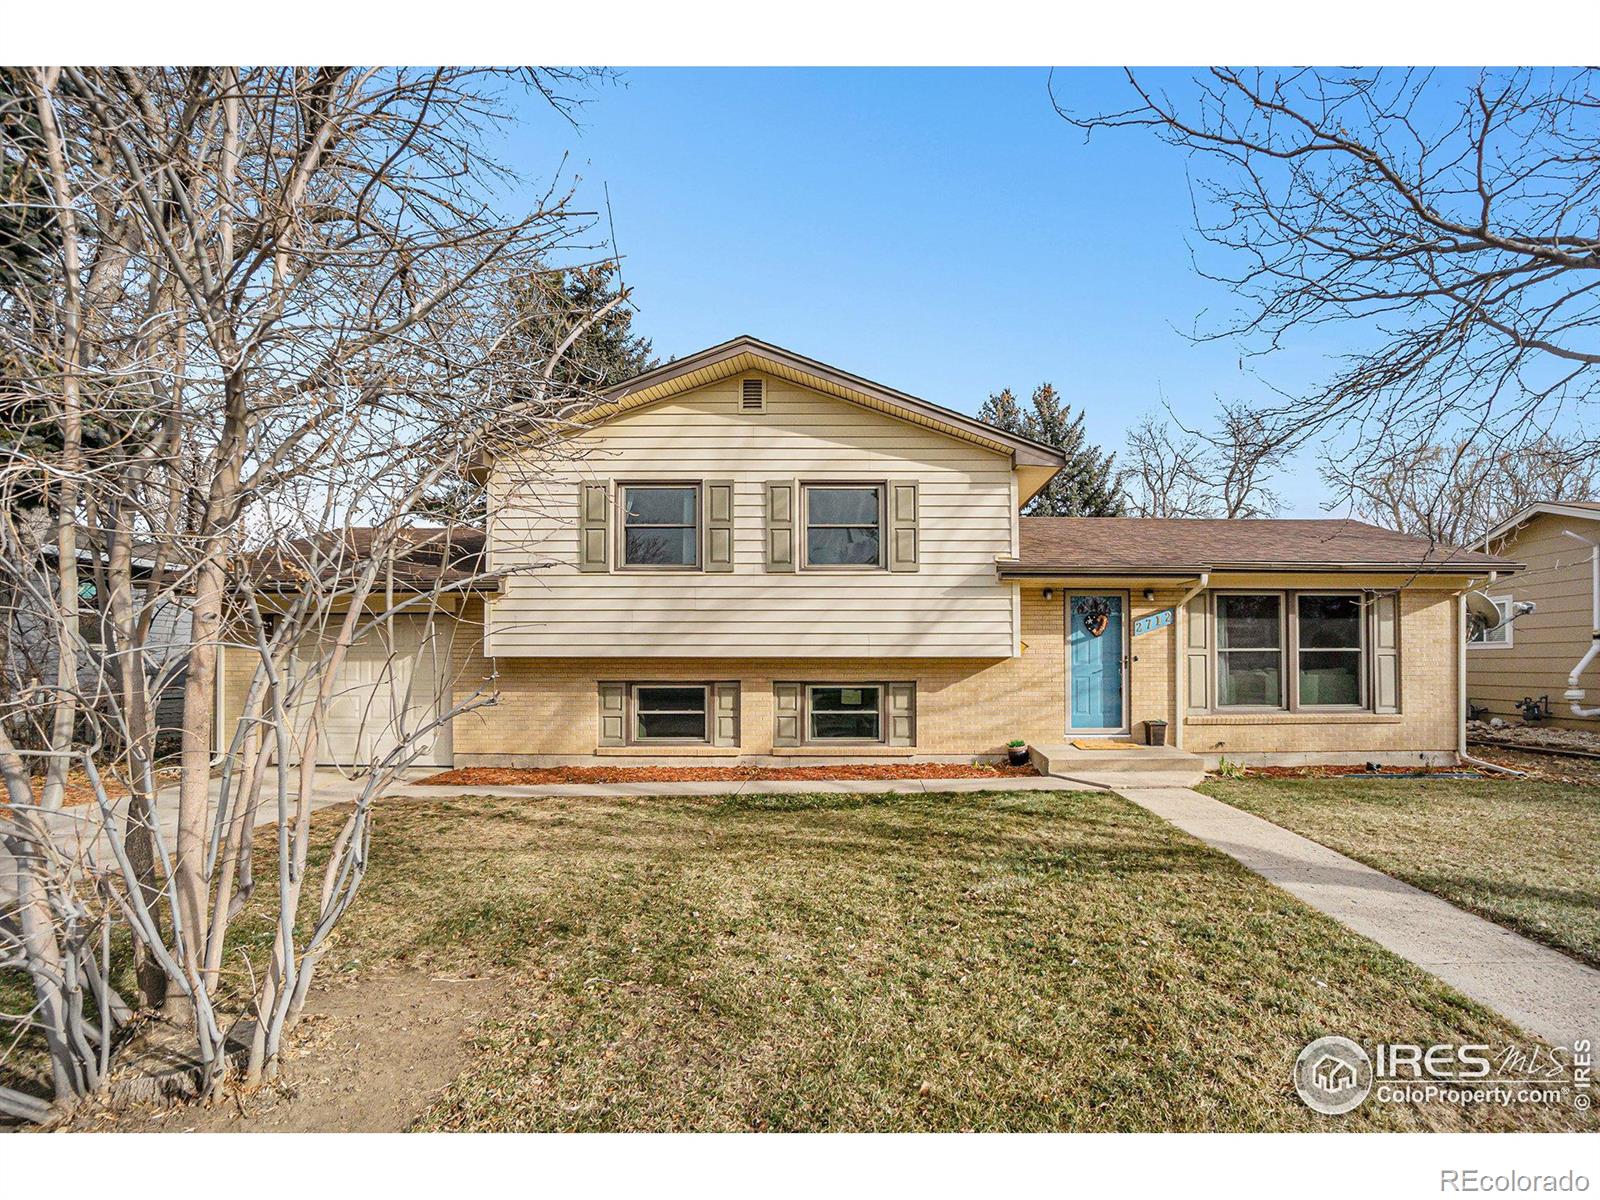 2712  Tulane Drive, fort collins MLS: 4567891001473 Beds: 4 Baths: 2 Price: $575,000